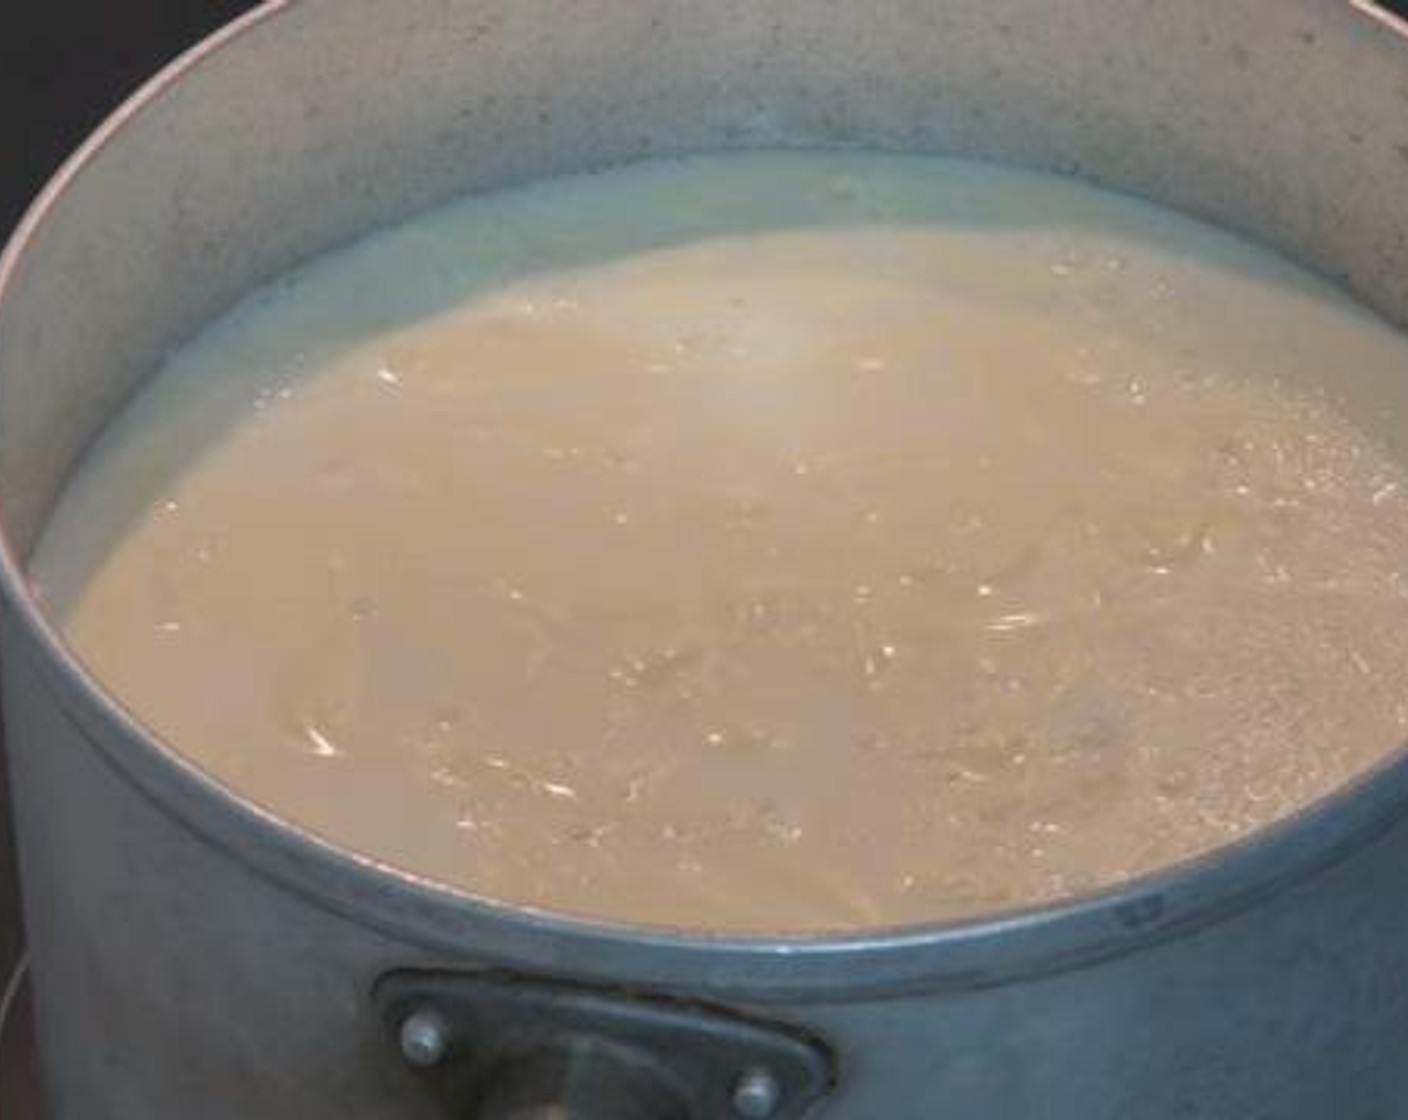 step 1 Into a pot, add your Whole Milk (8 cups), Heavy Cream (1 cup), and Salt (1 tsp). Give the mixture a good stir over a high heat for about 15 minutes.